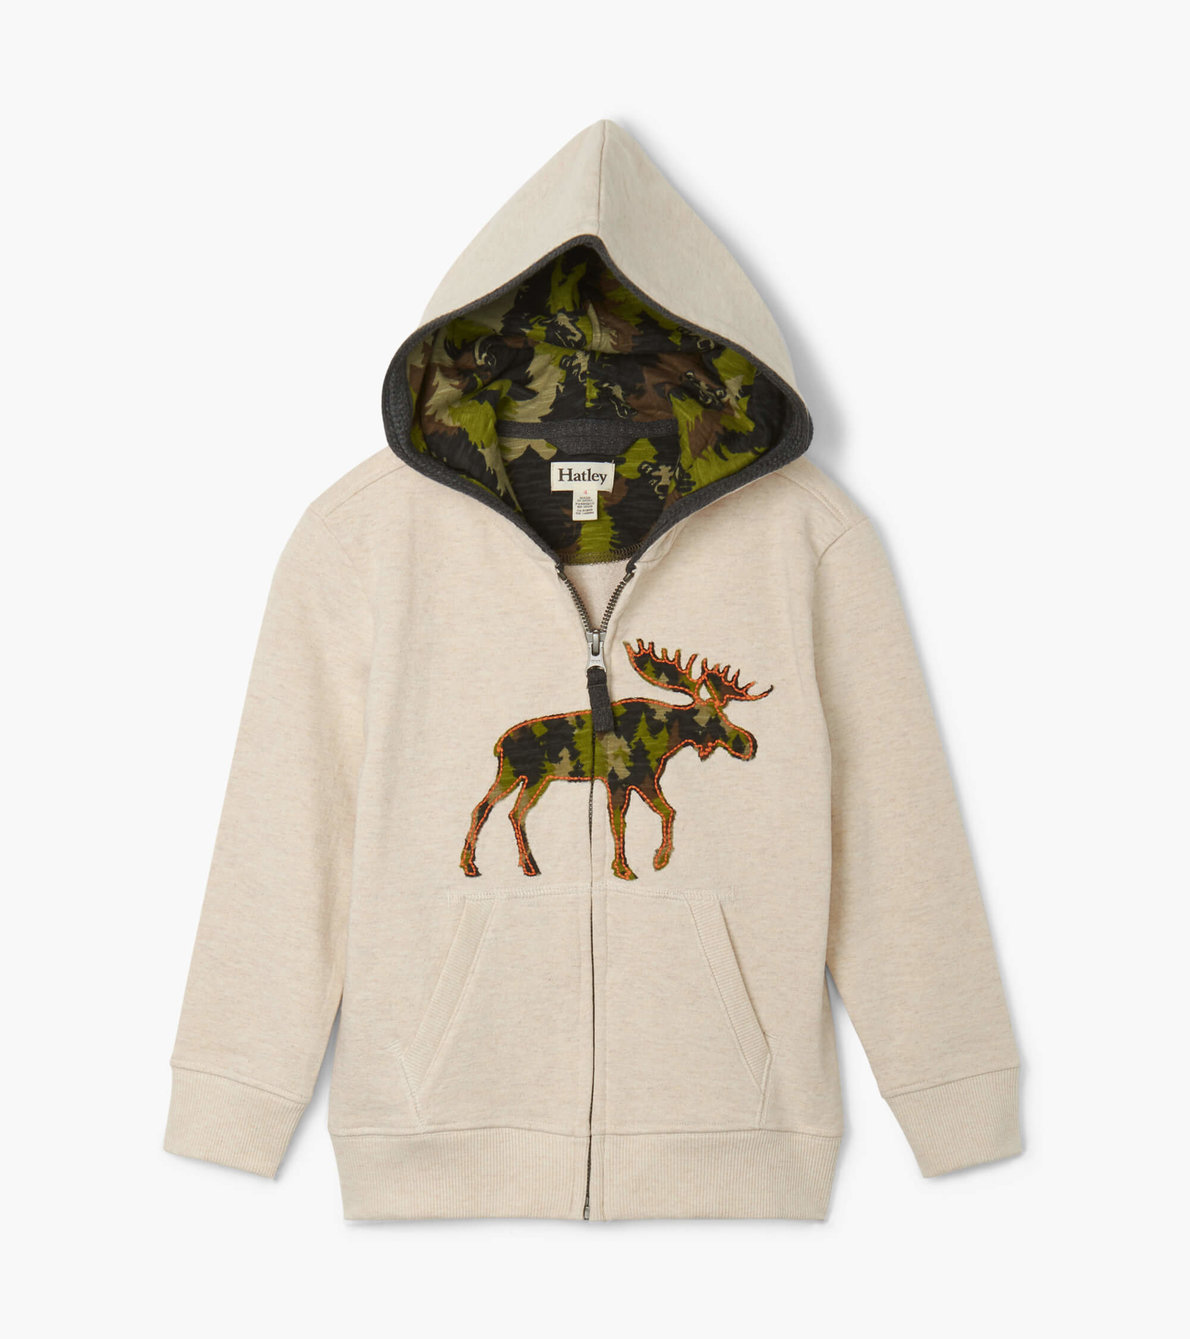 View larger image of Forest Camo Moose Hoodie